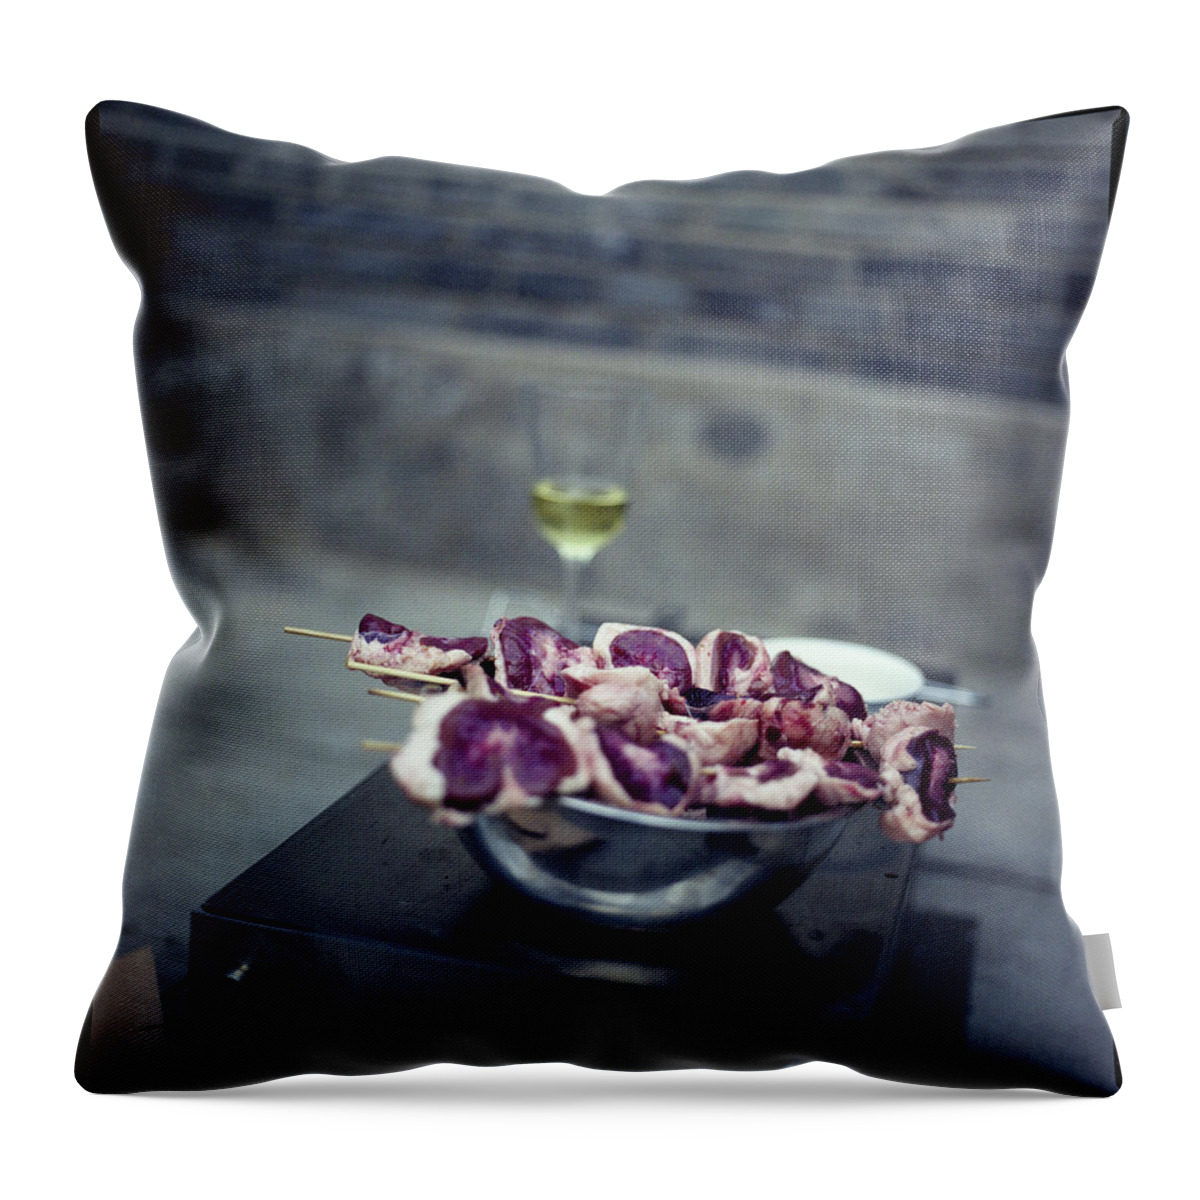 Alcohol Throw Pillow featuring the photograph Grilled Mutton Kidneys by Oliver Rockwell